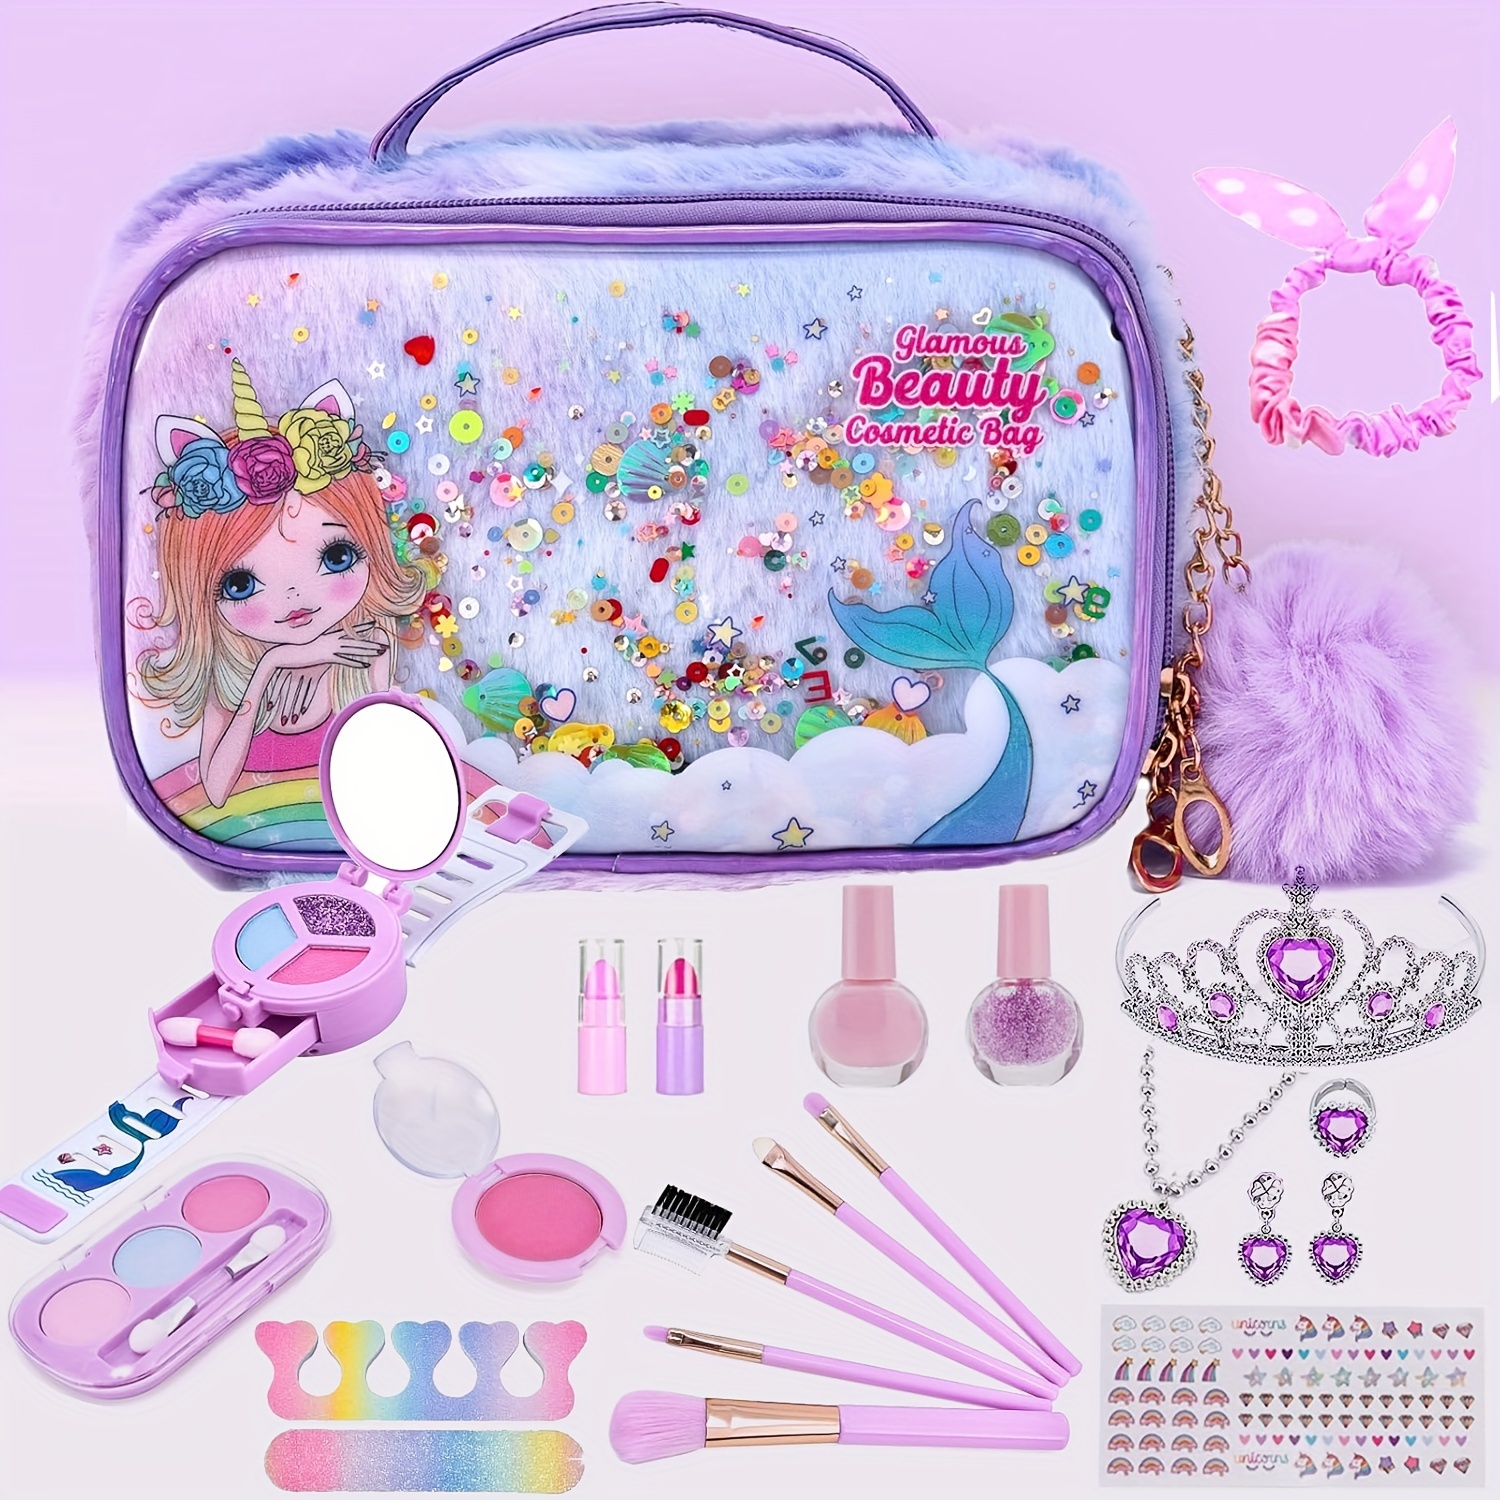 

Makeup Kit For Girl Unicorn Makeup Set Real Washable Make Up Kit For Little Girl Princess Pretend Play Vanity Set Perfect Christmas Birthday Gifts, Ideal For Mother's Day